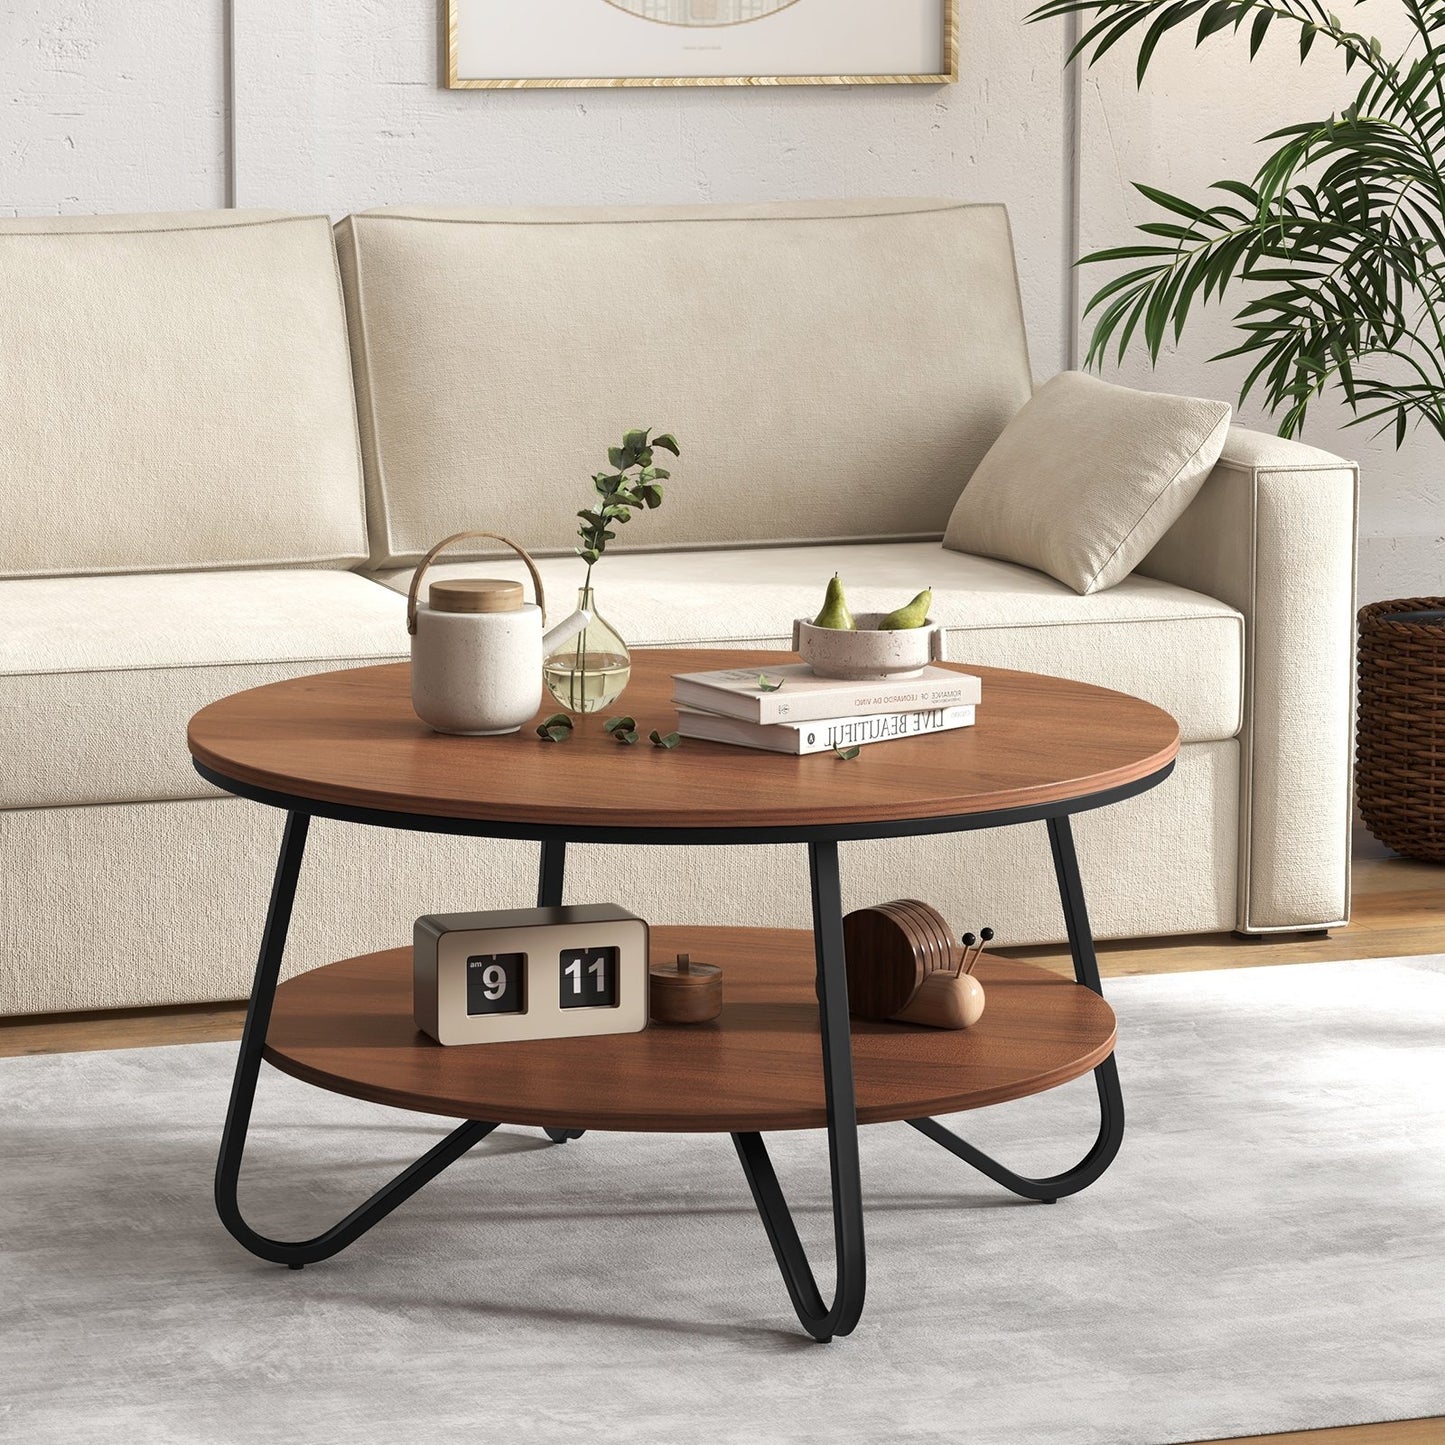 33.5" Round Coffee Table with Wood Grain Finish and Heavy-duty Metal Frame, Walnut